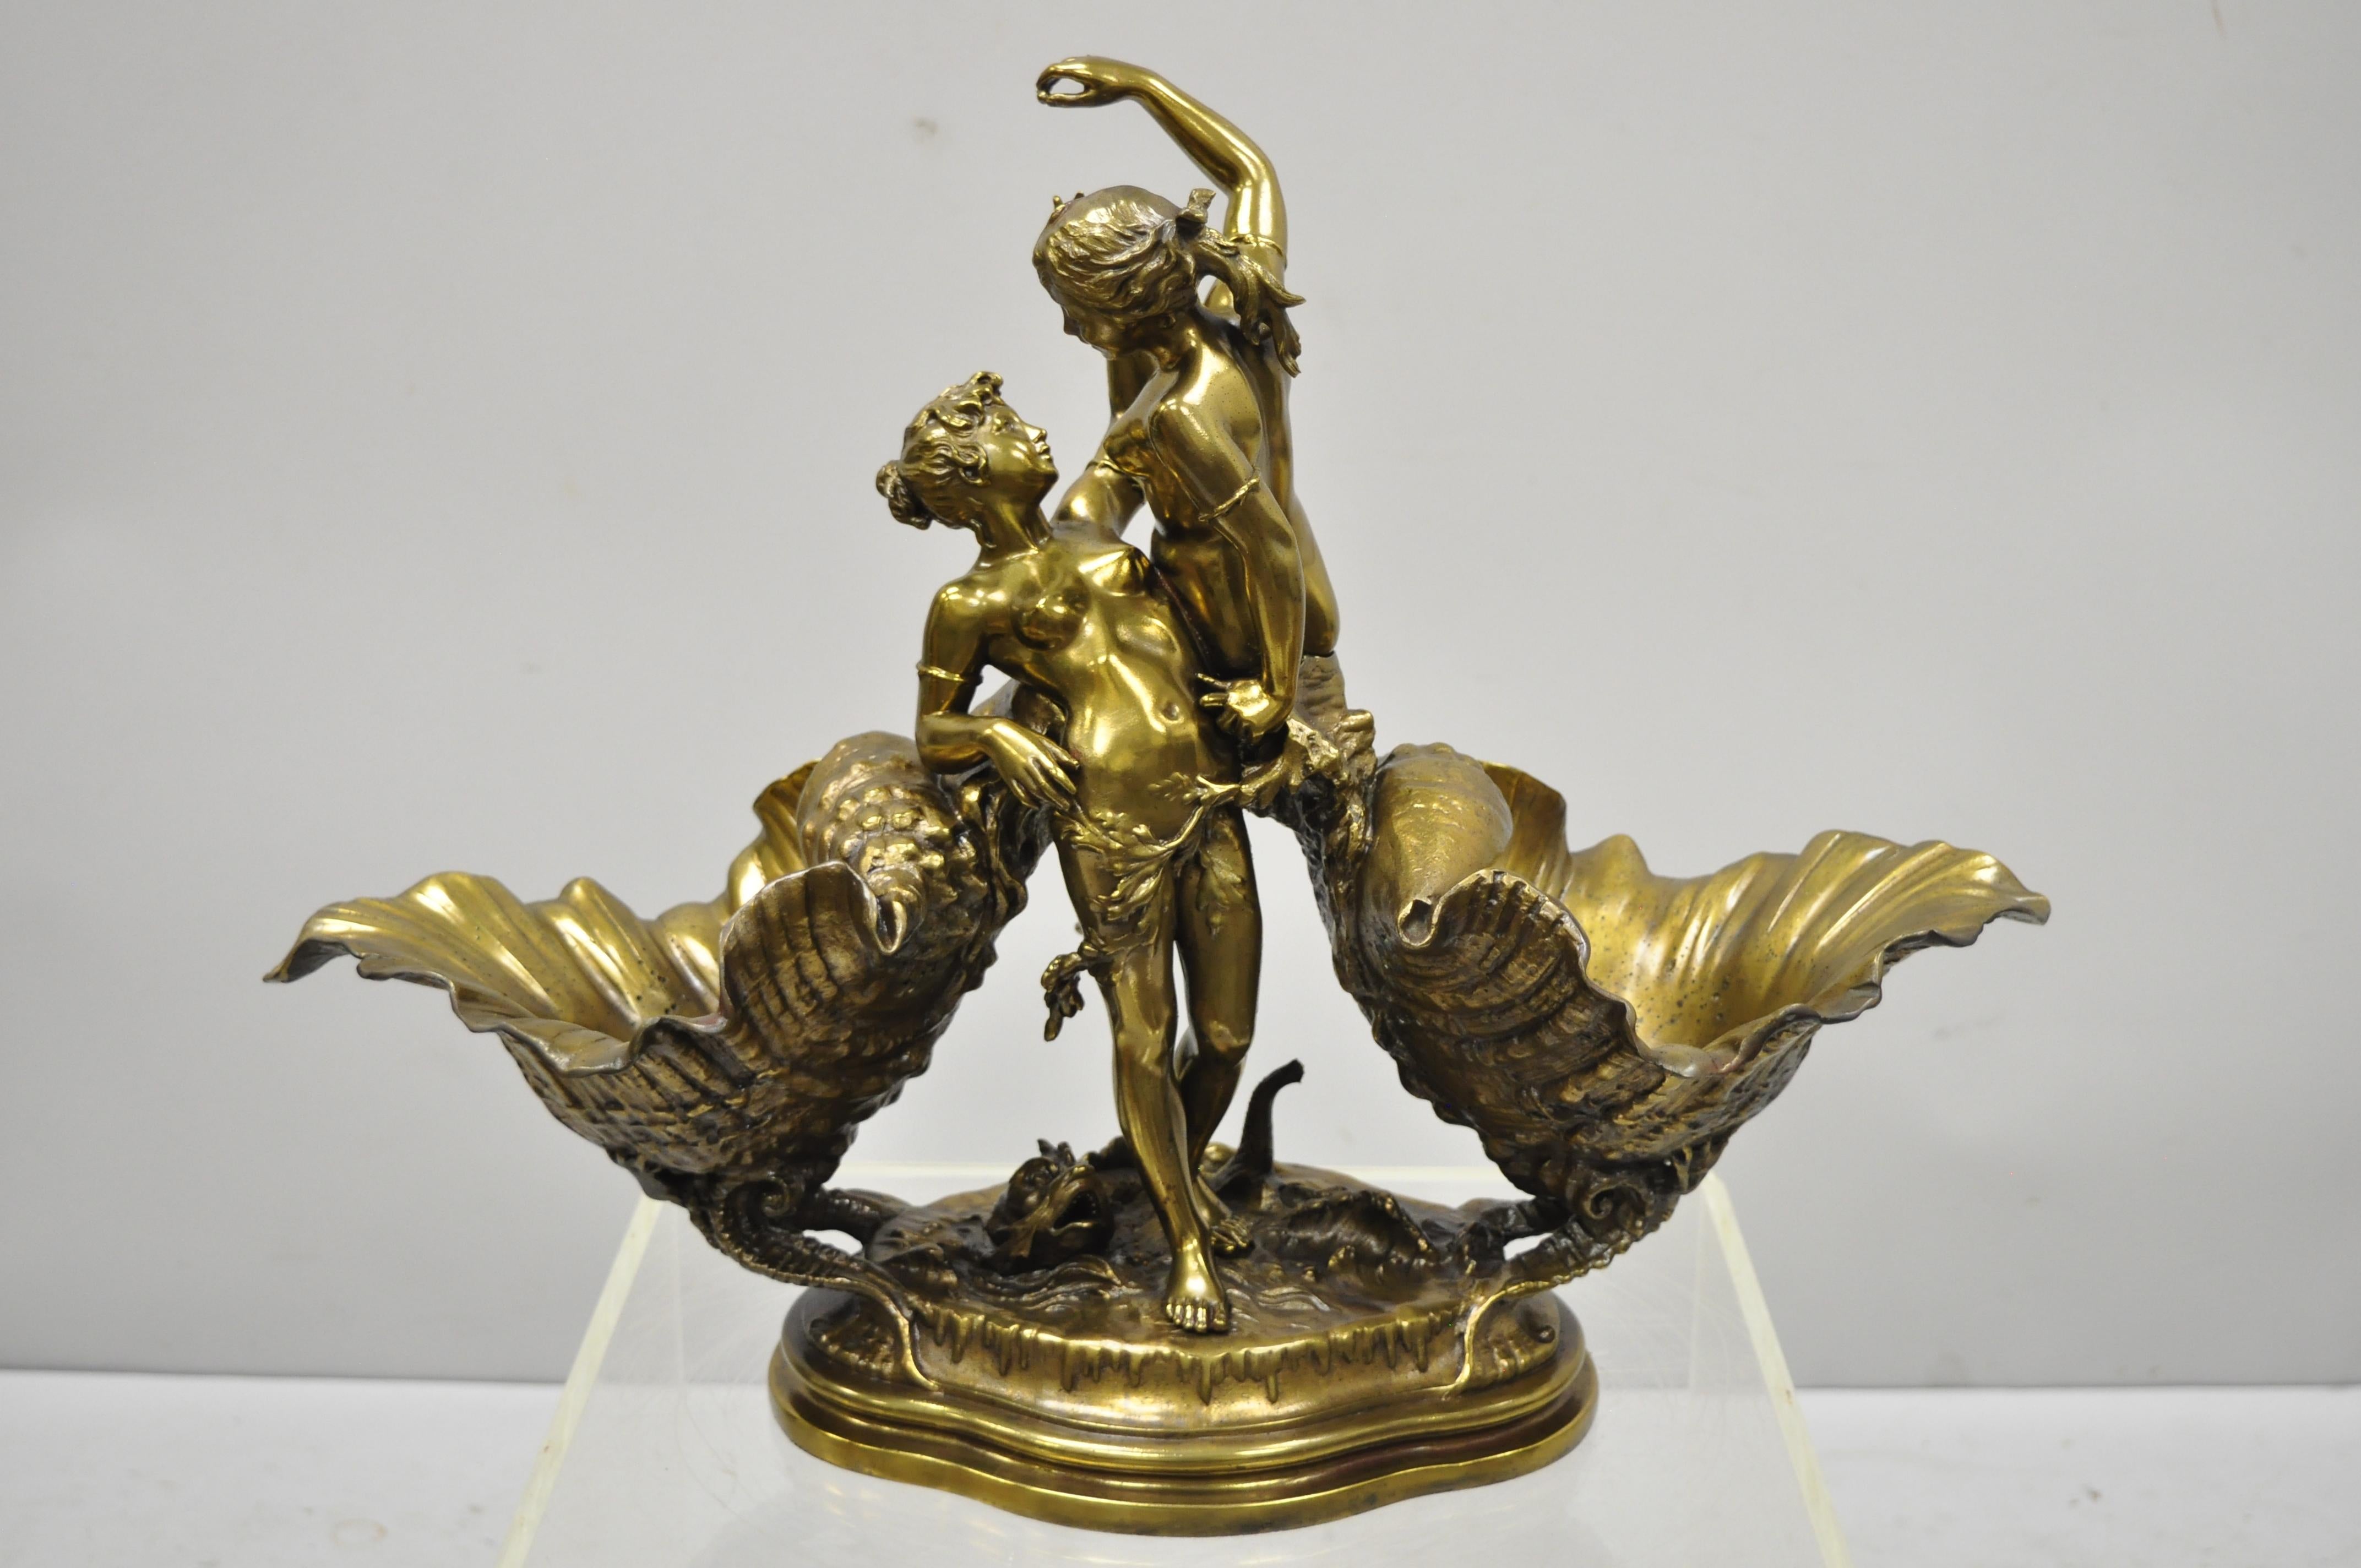 French Spelter bronze finish centerpiece sculpture, Charles Georges Ferville Suan. Item features cast spelter metal sculpture, bronze patinated finish, double woman maiden figures, shell double dishes, serpent to base, marked 